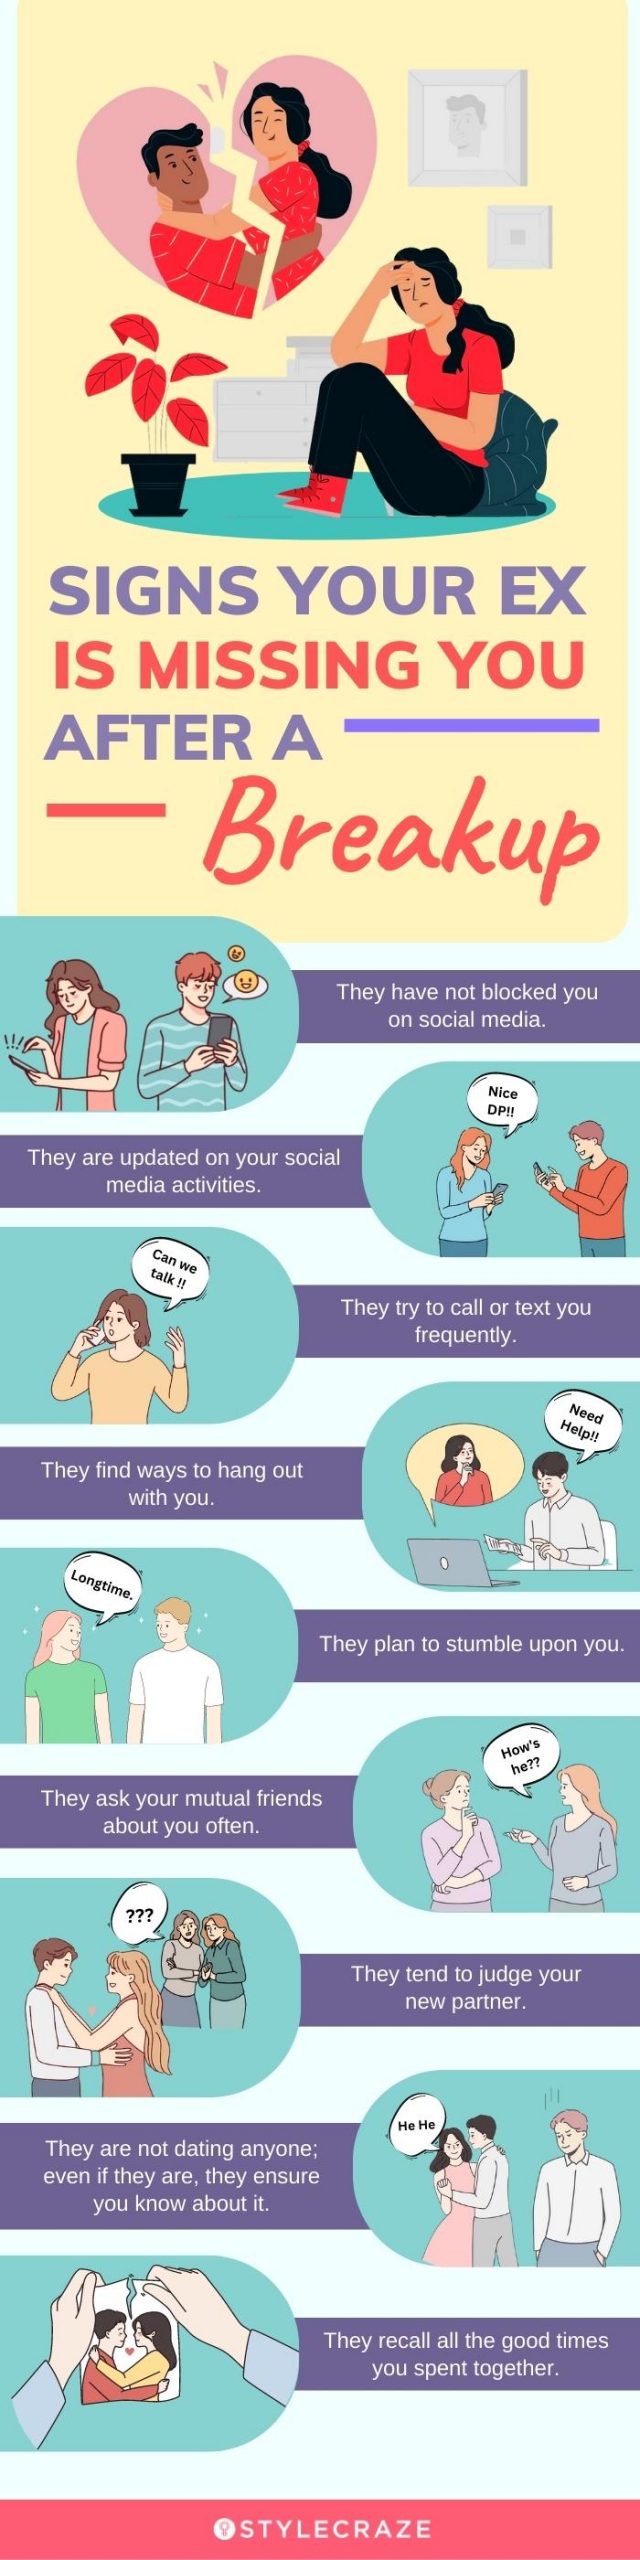 signs your ex is missing you after a breakup (infographic)